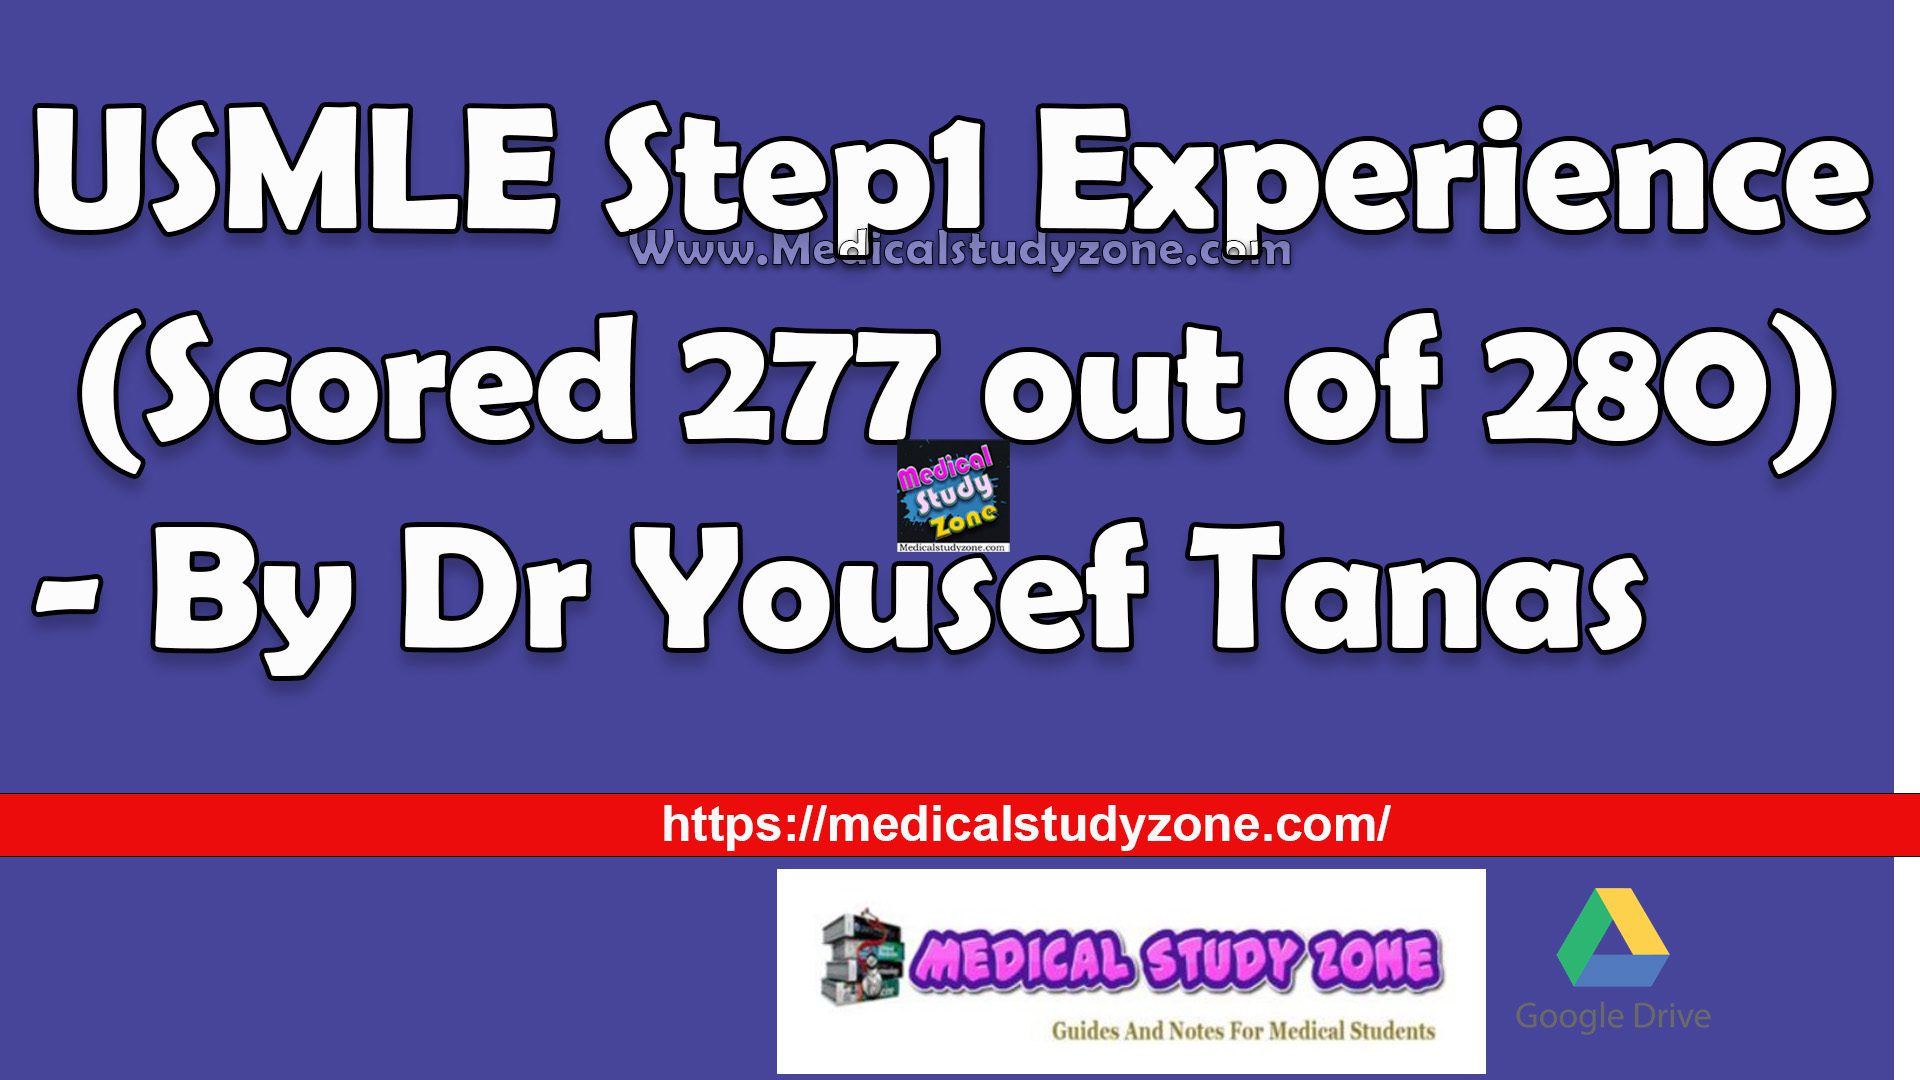 USMLE Step1 Experience (Scored 277 out of 280) - By Dr Yousef Tanas